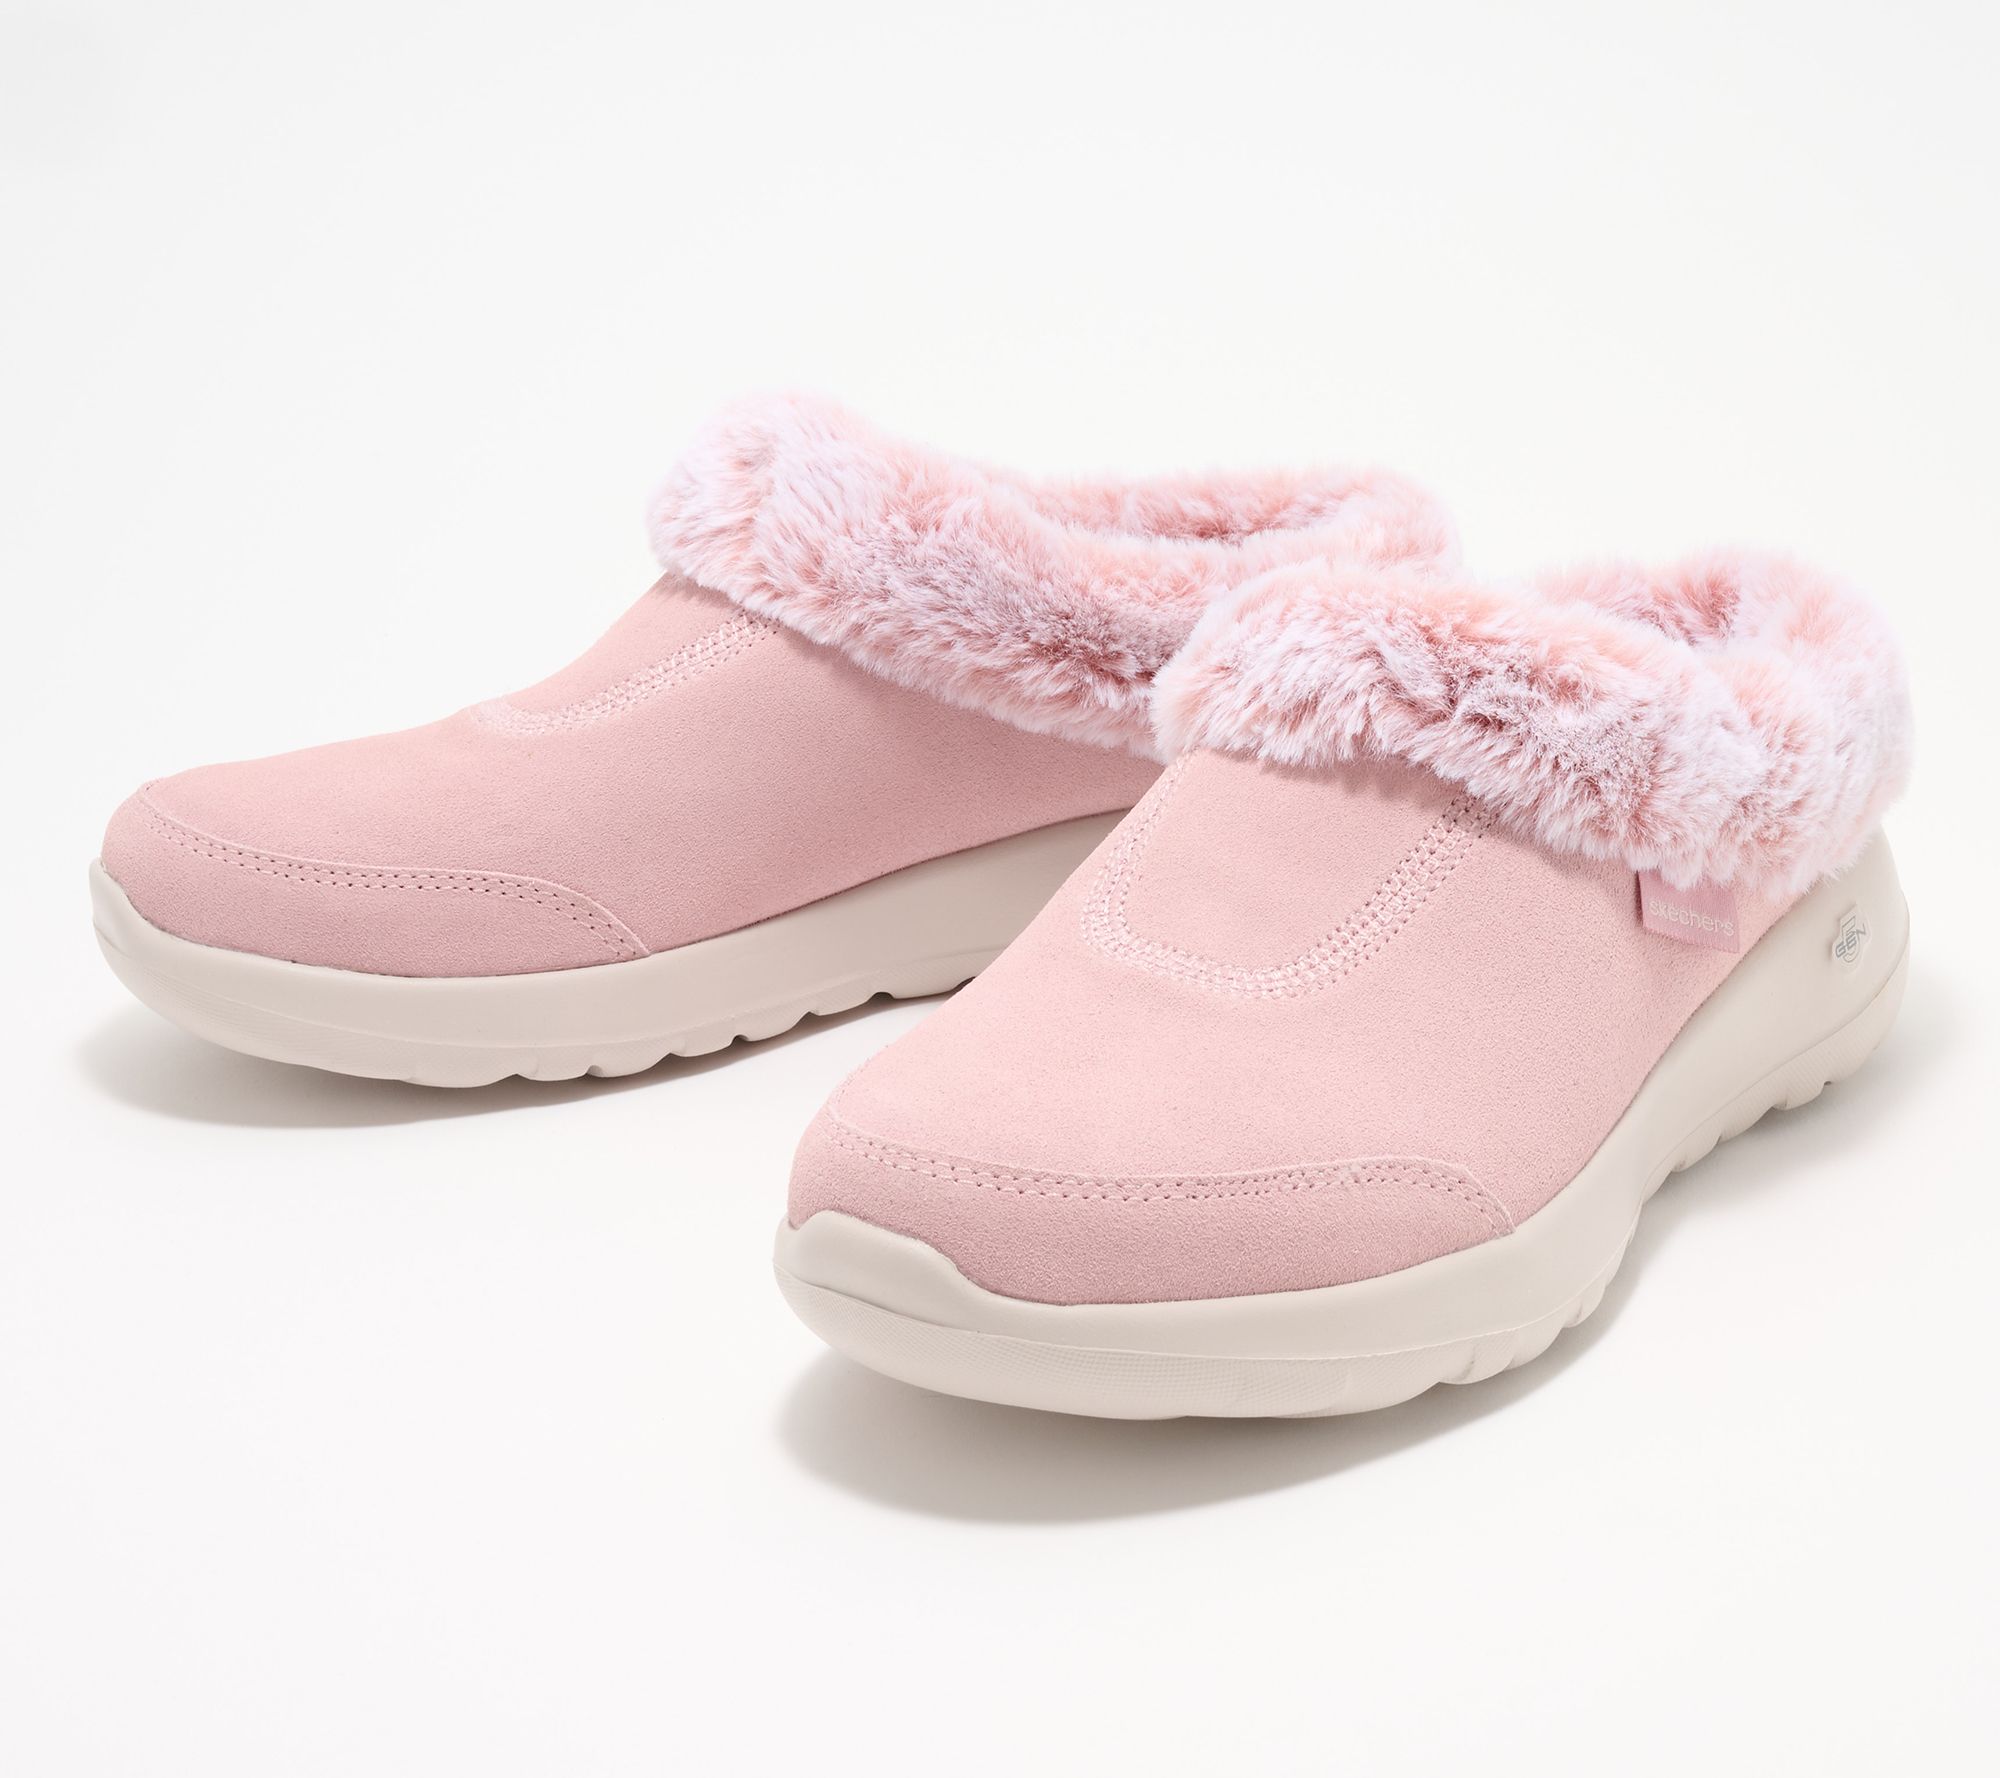 Skechers On-the-GO Joy Suede and Faux Fur - Snuggled Up - QVC.com